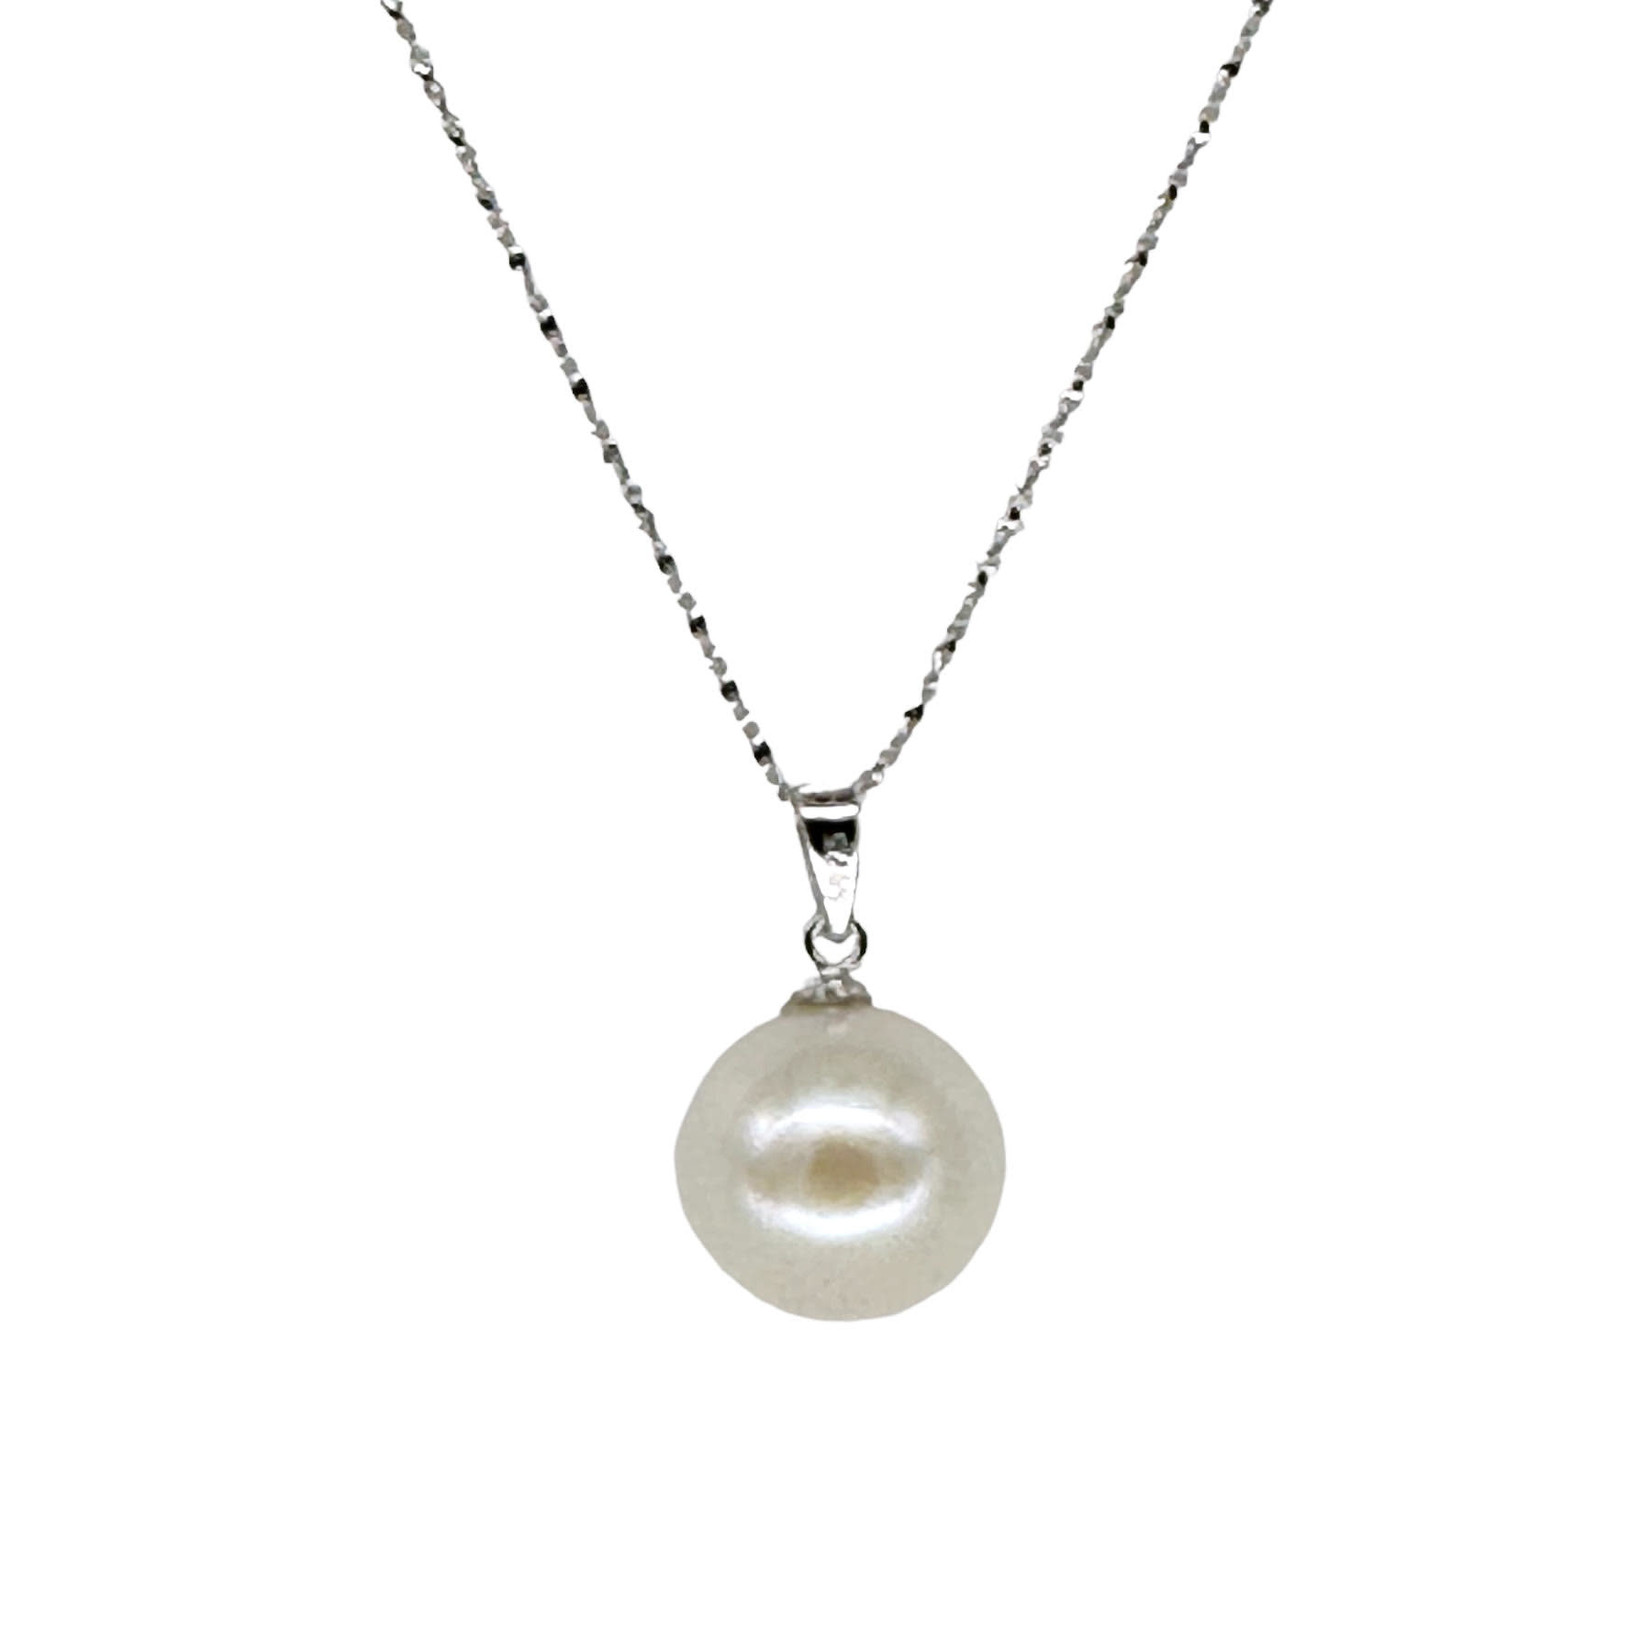 12.5-13.5mm Cultured Pearl Pendant White on Sterling Silver Chain